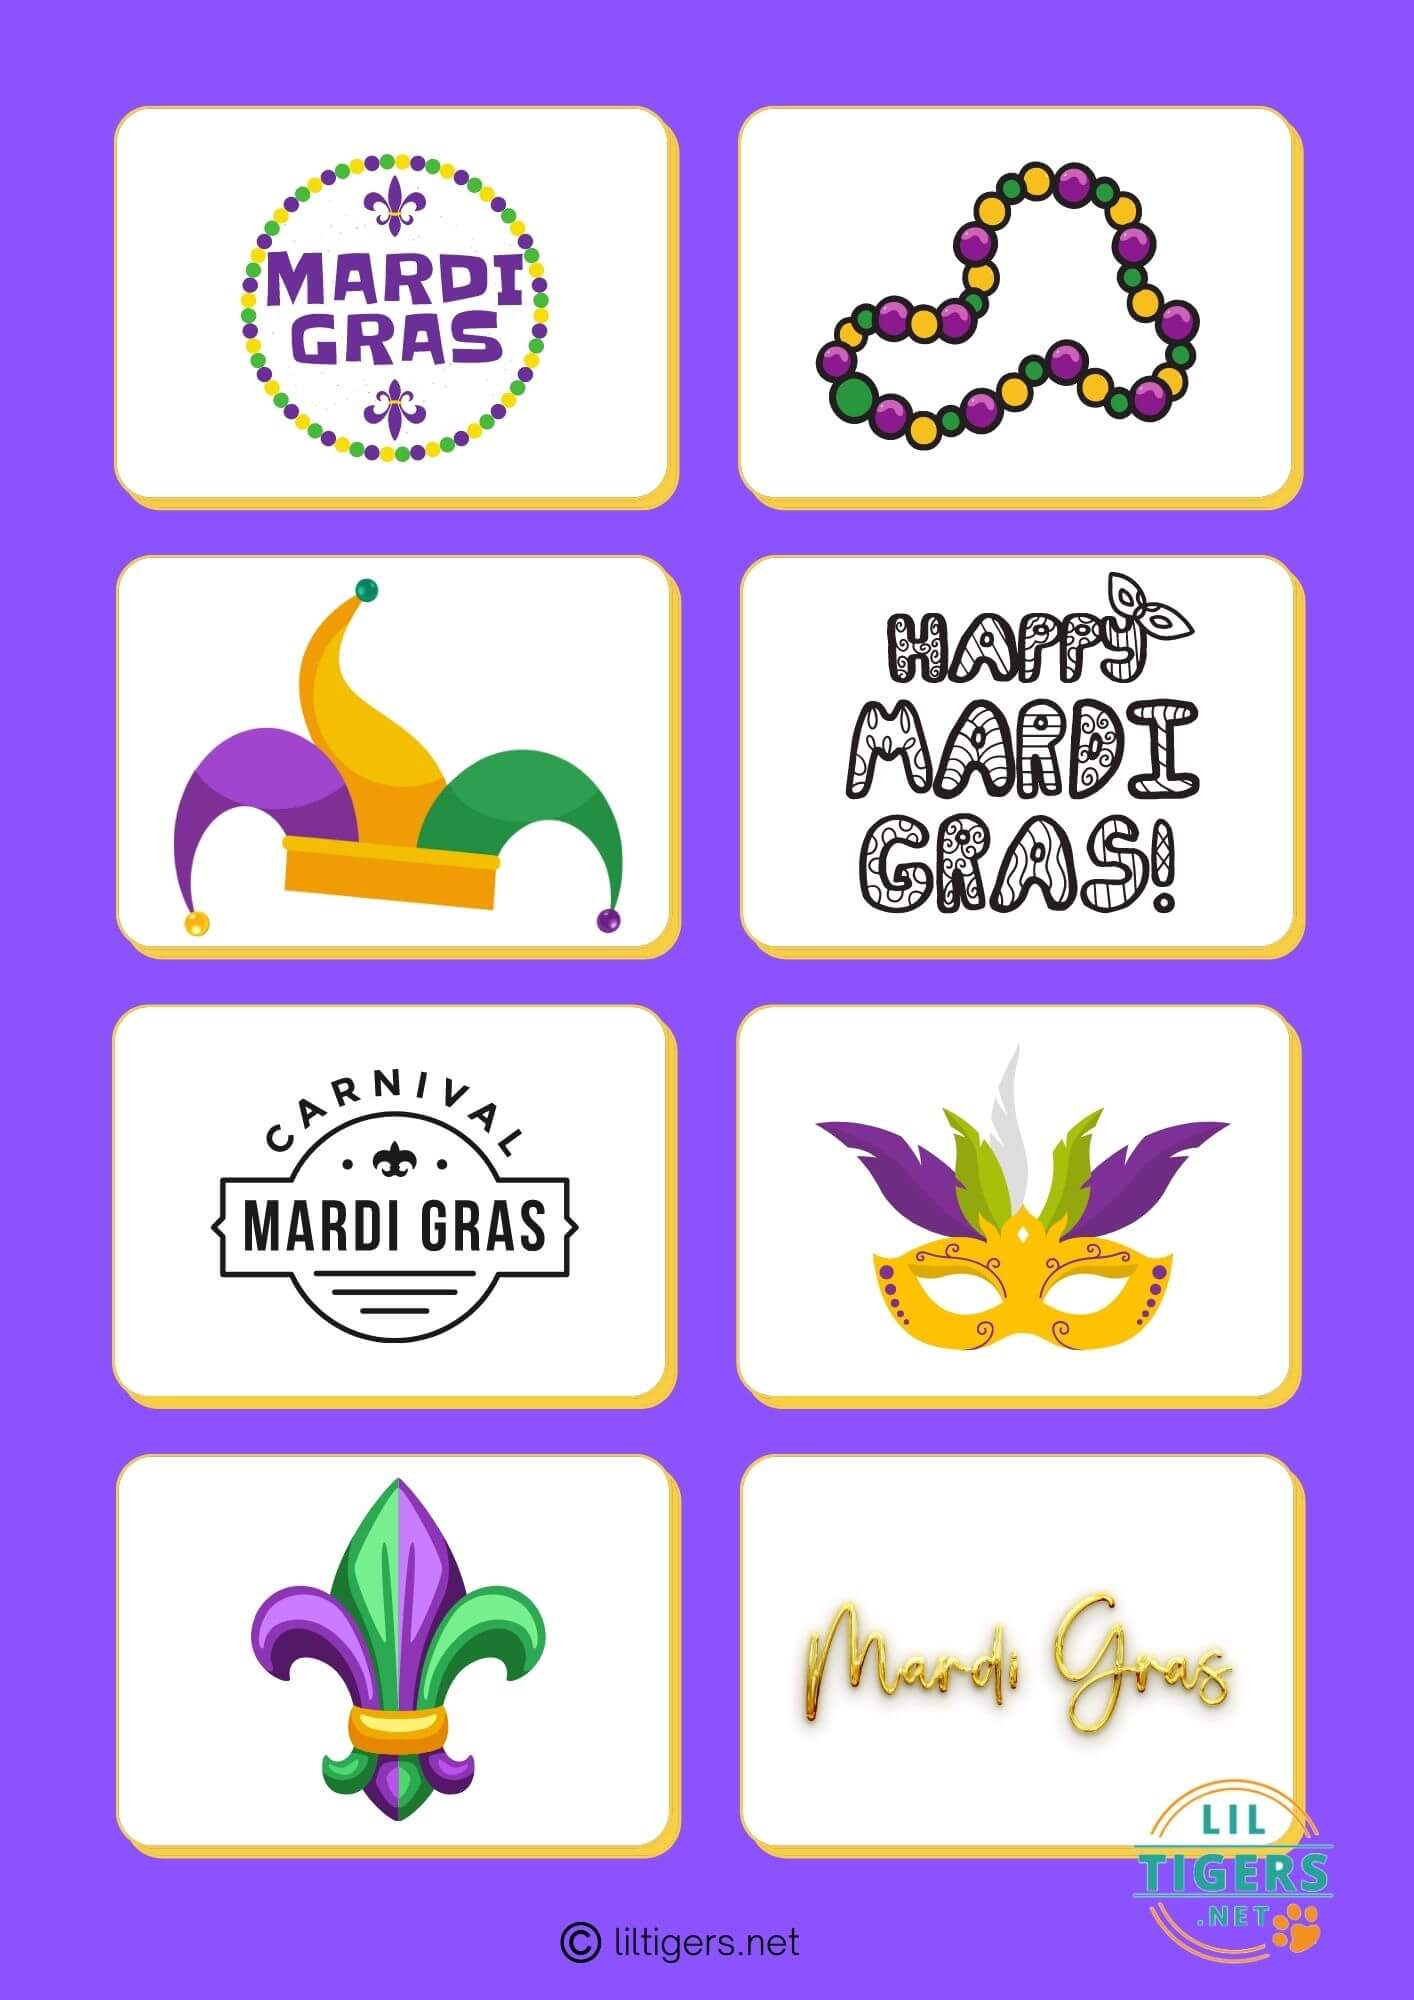 Best Mardi Gras Quotes for Kids